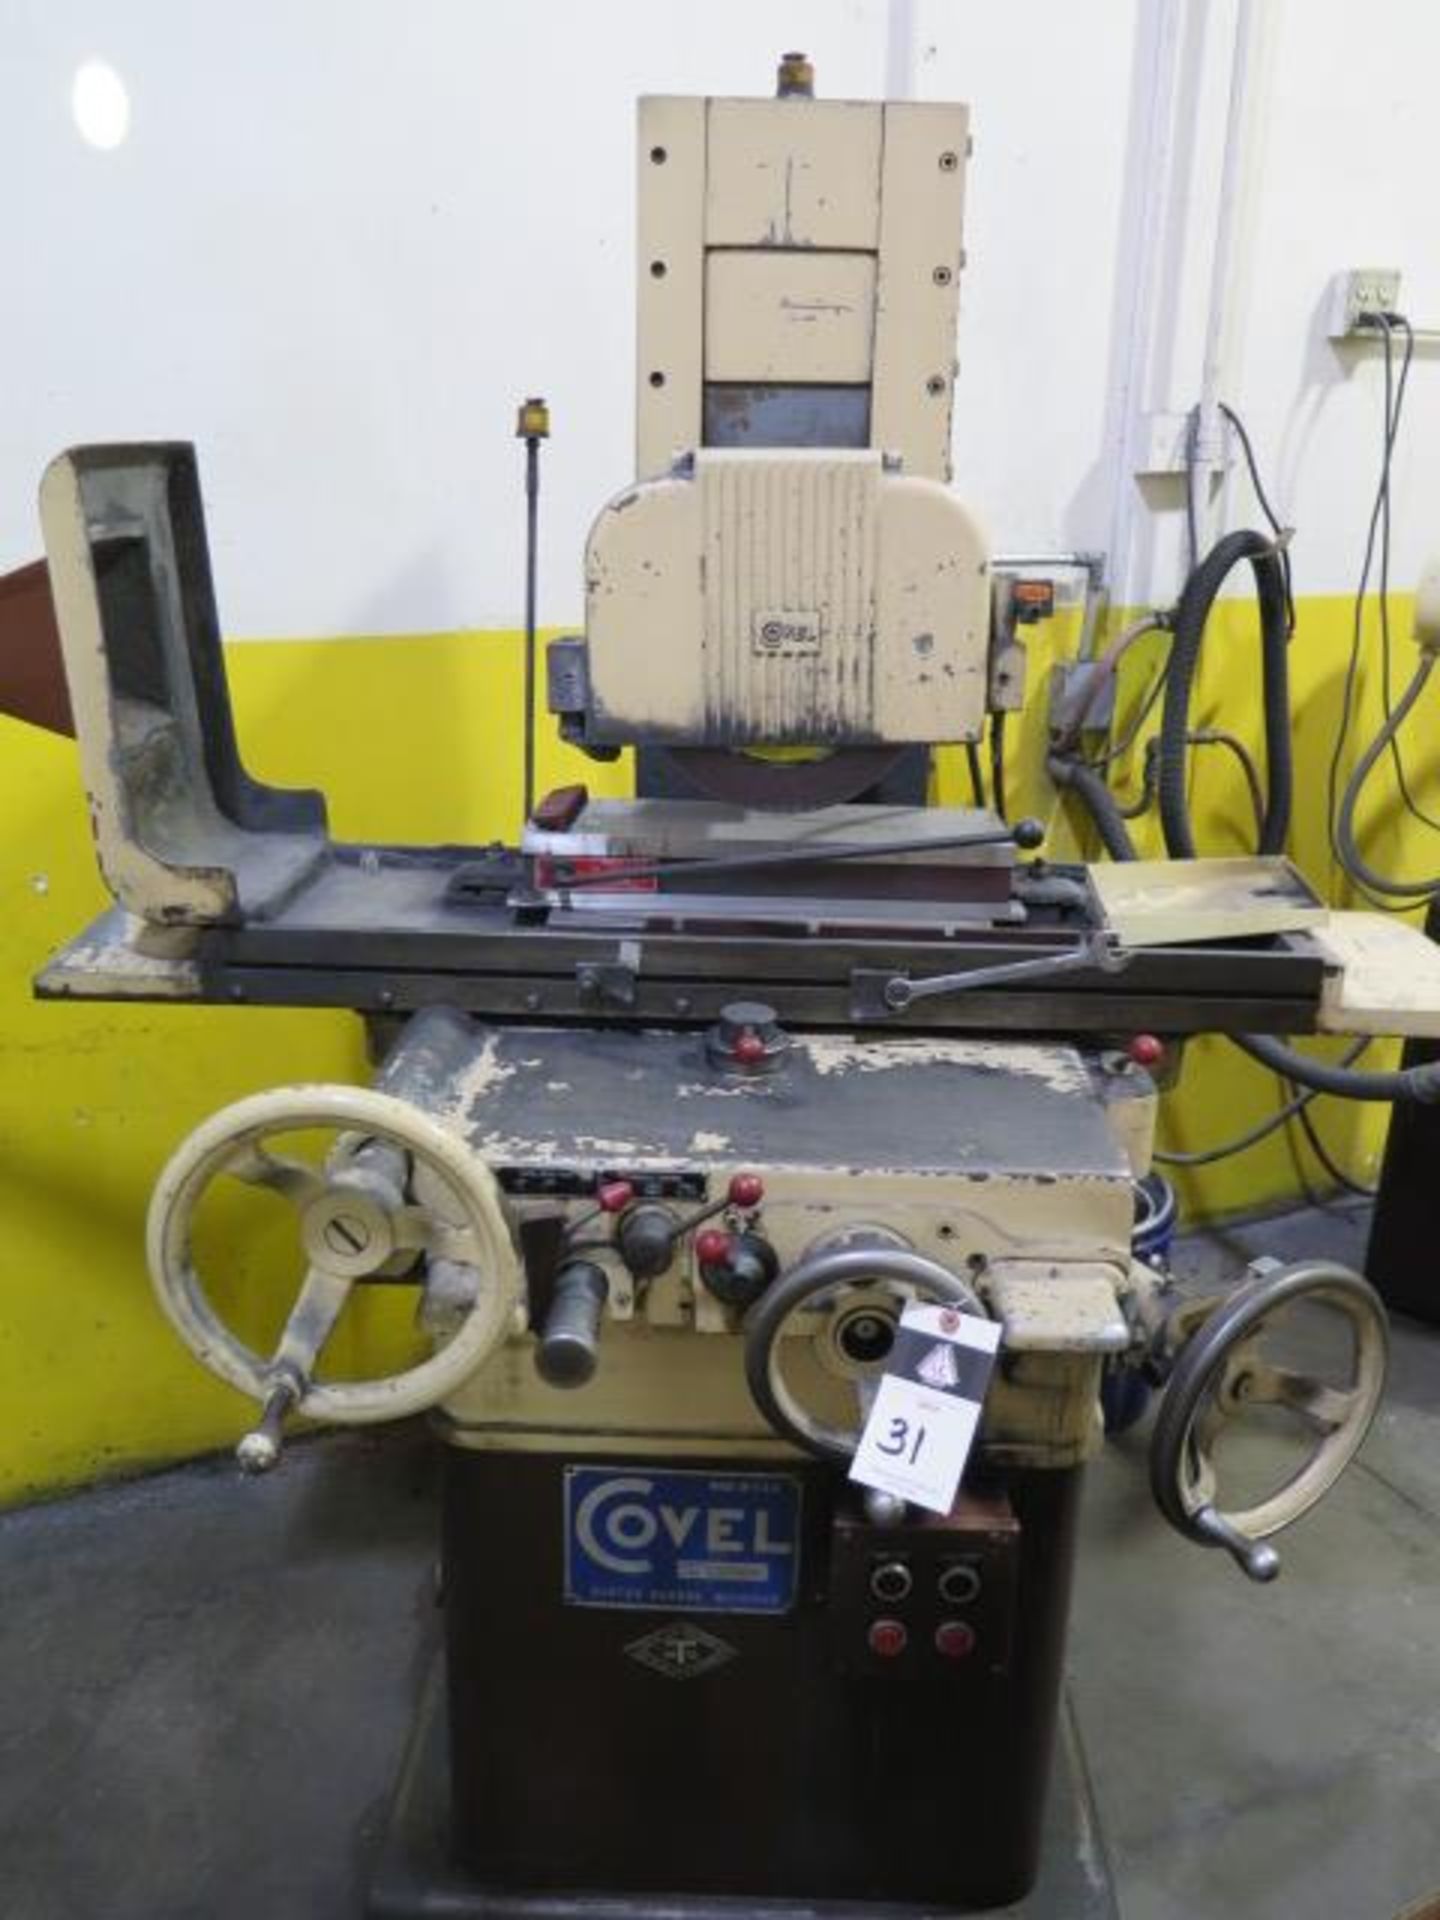 Covel 6” x 18” Automatic Surface Grinder s/n 17H-5315 w/ Suburban 6” x 18” Magnetic Chuck,SOLD AS IS - Image 2 of 9